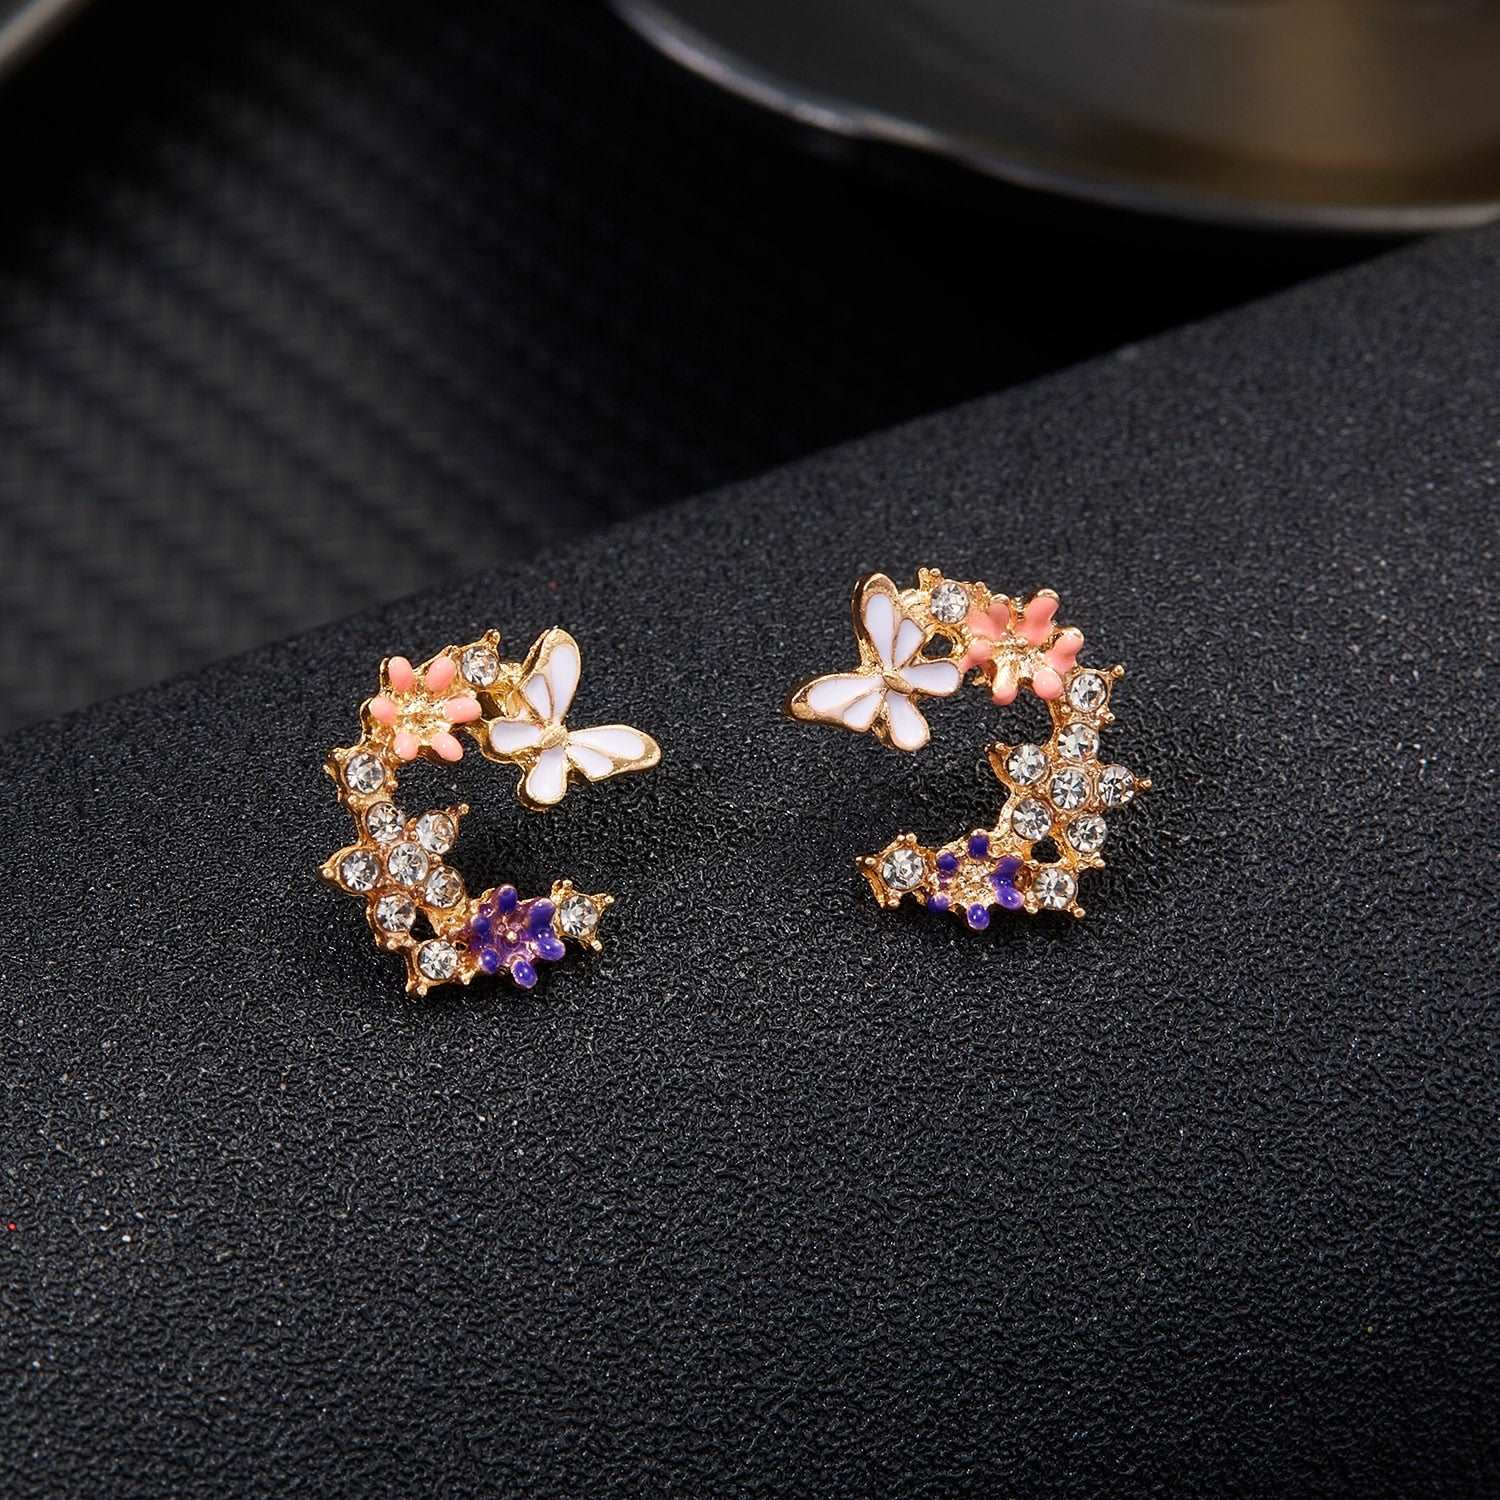 Flower & Butterfly Earrings - M&H FashionFlower & Butterfly EarringsM&H FashionM&H Fashion200001034:200004862#1616Flower & Butterfly EarringsM&H FashionM&H FashionThese Flower &amp; Butterfly Earrings are the perfect accessory for any outfit. With a trendy style and geometric shape, these earrings are sure to make a statement.Flower & Butterfly Earrings